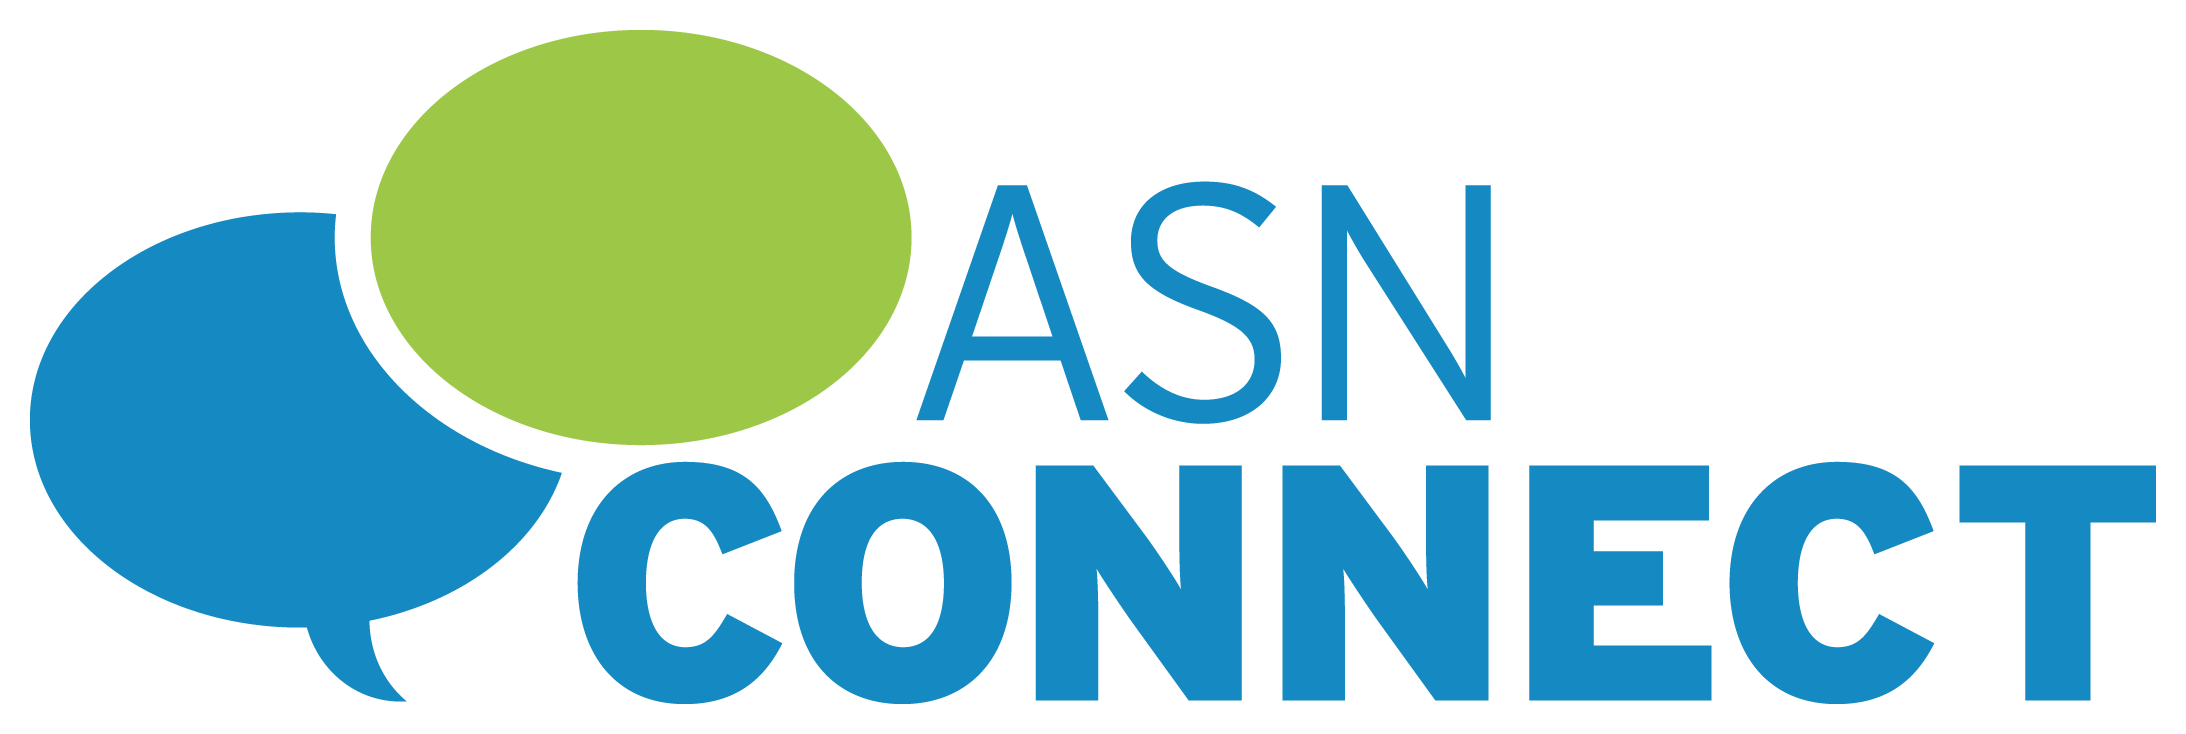 Welcome to ASN Connect